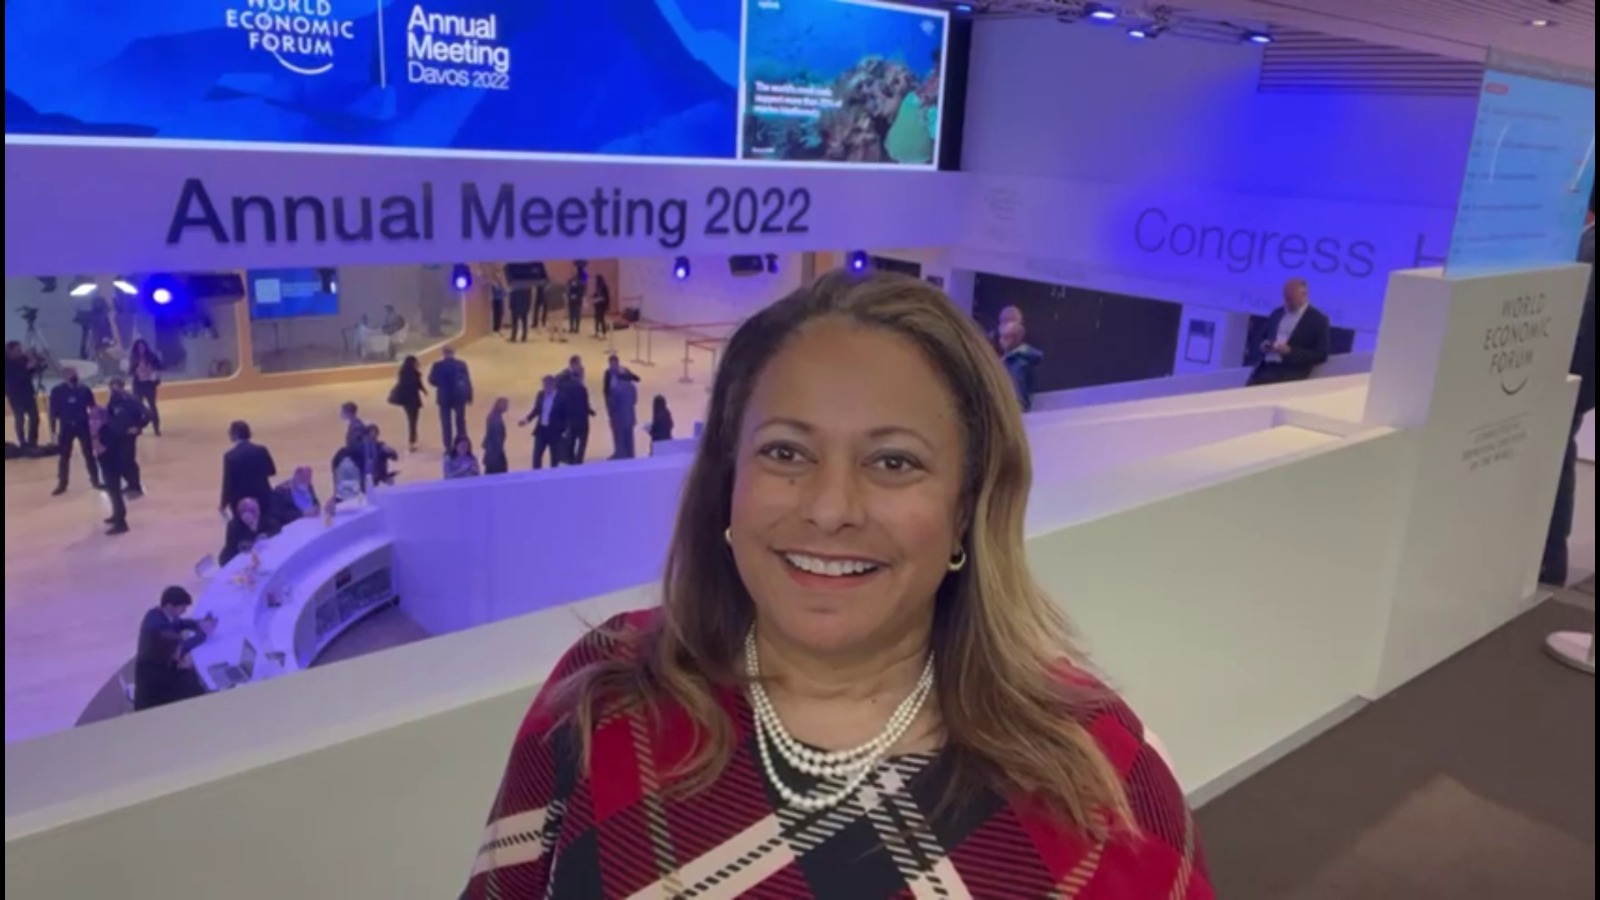 AFRICA.COM: Live from the World Economic Forum in Davos